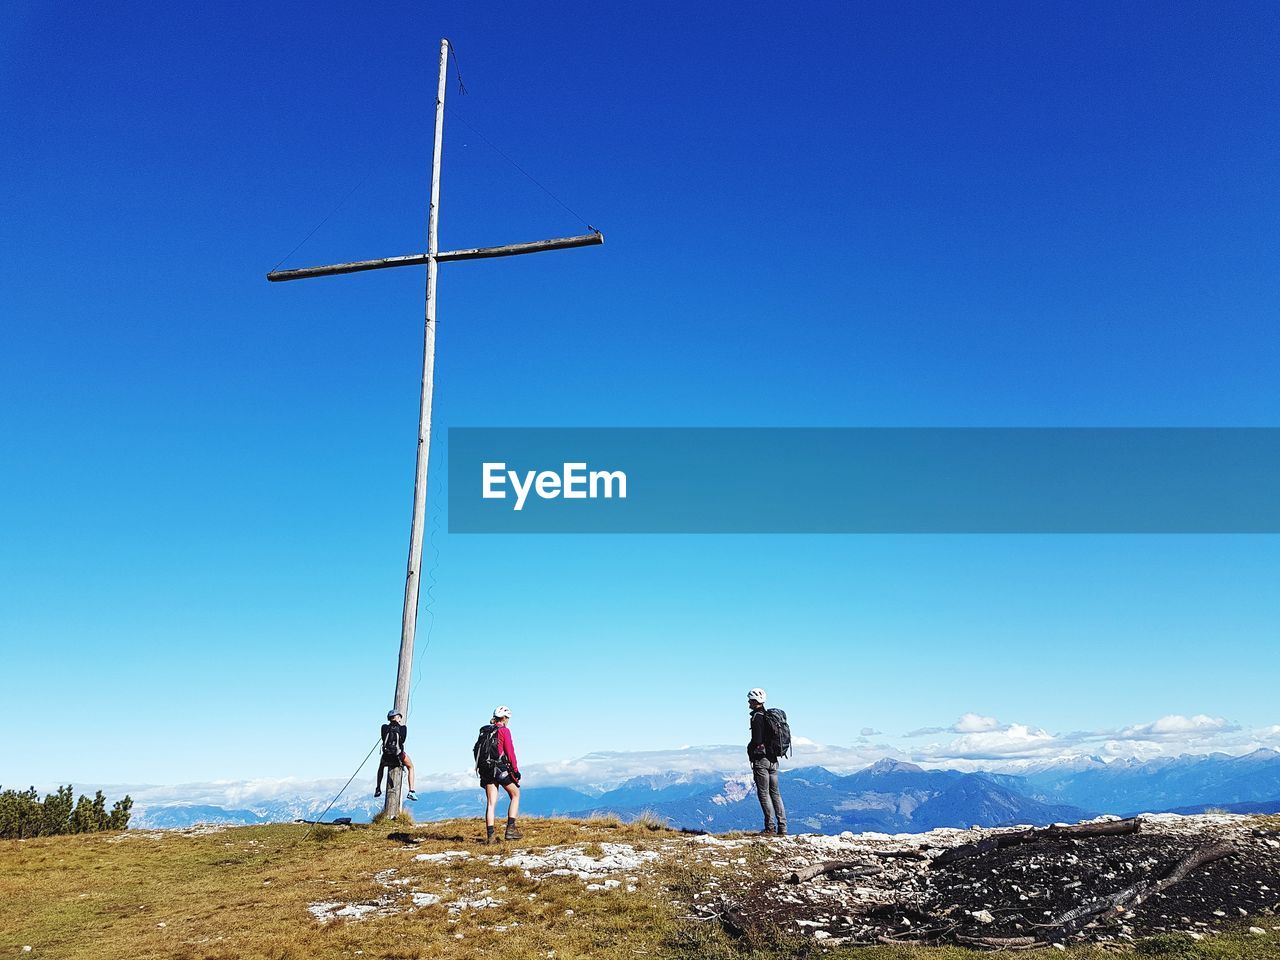 People standing by cross on mountain against clear blue sky